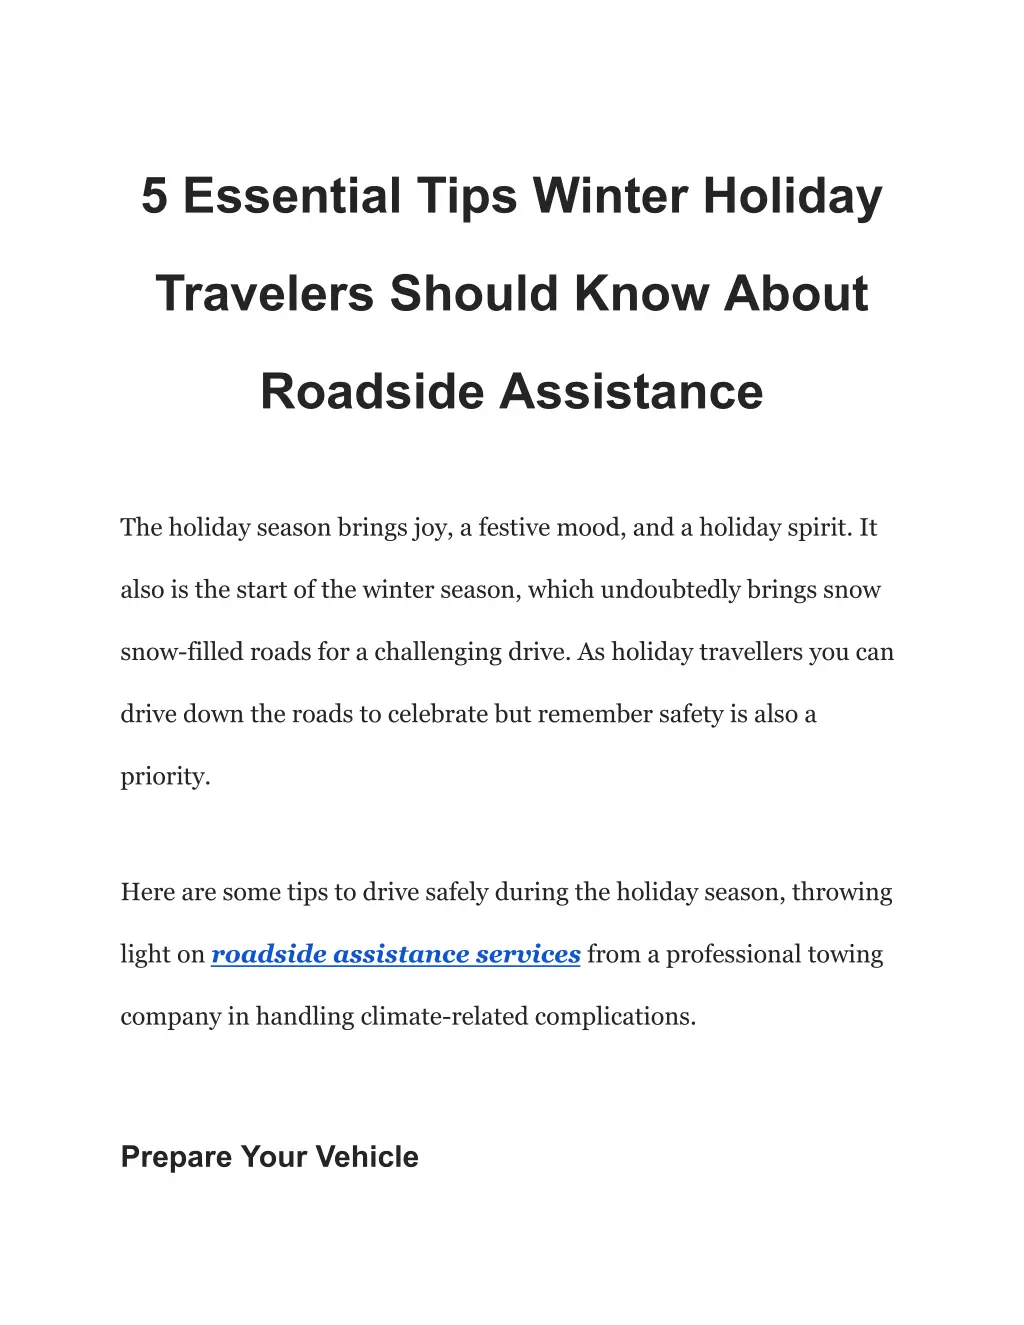 5 essential tips winter holiday n.